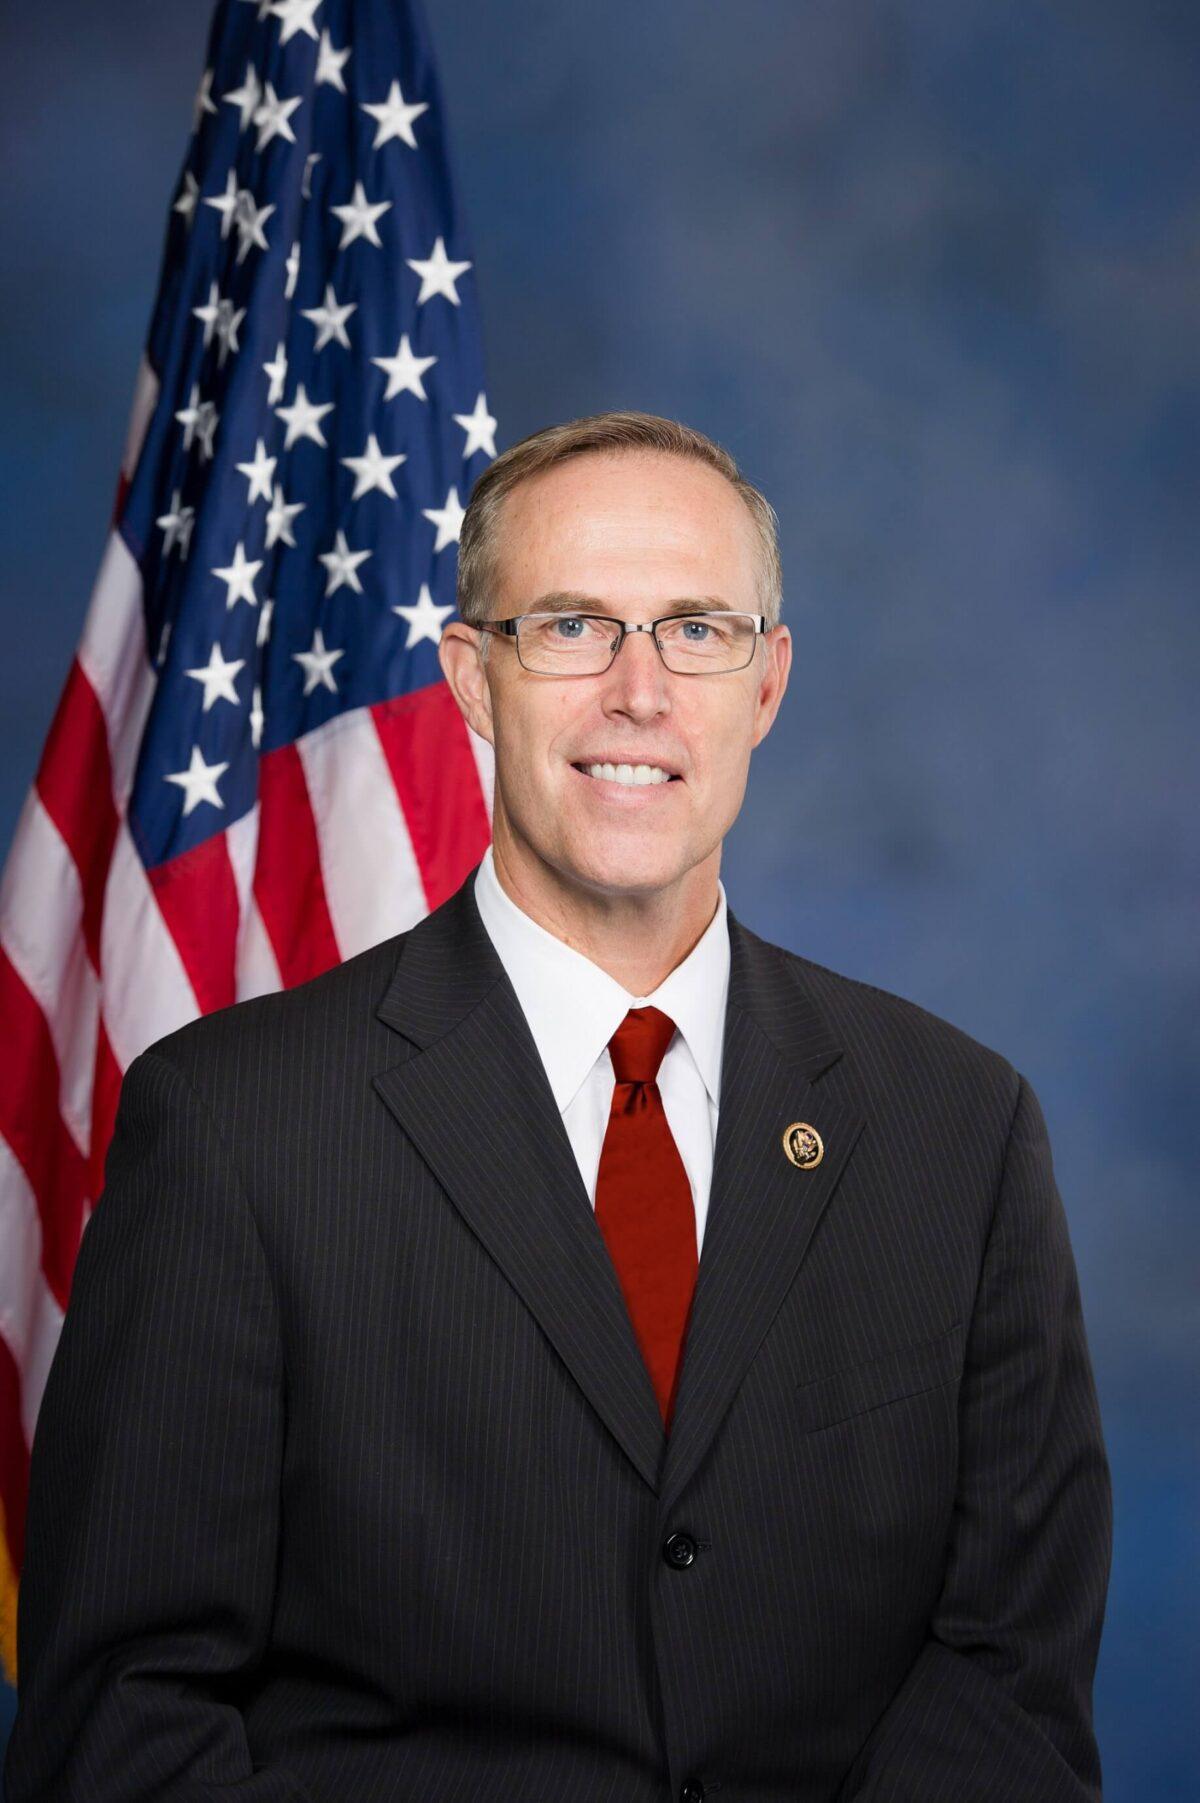 Rep. Jared Huffman (D-Calif.) in an undated file photo. (Courtesy of U.S. Congress)